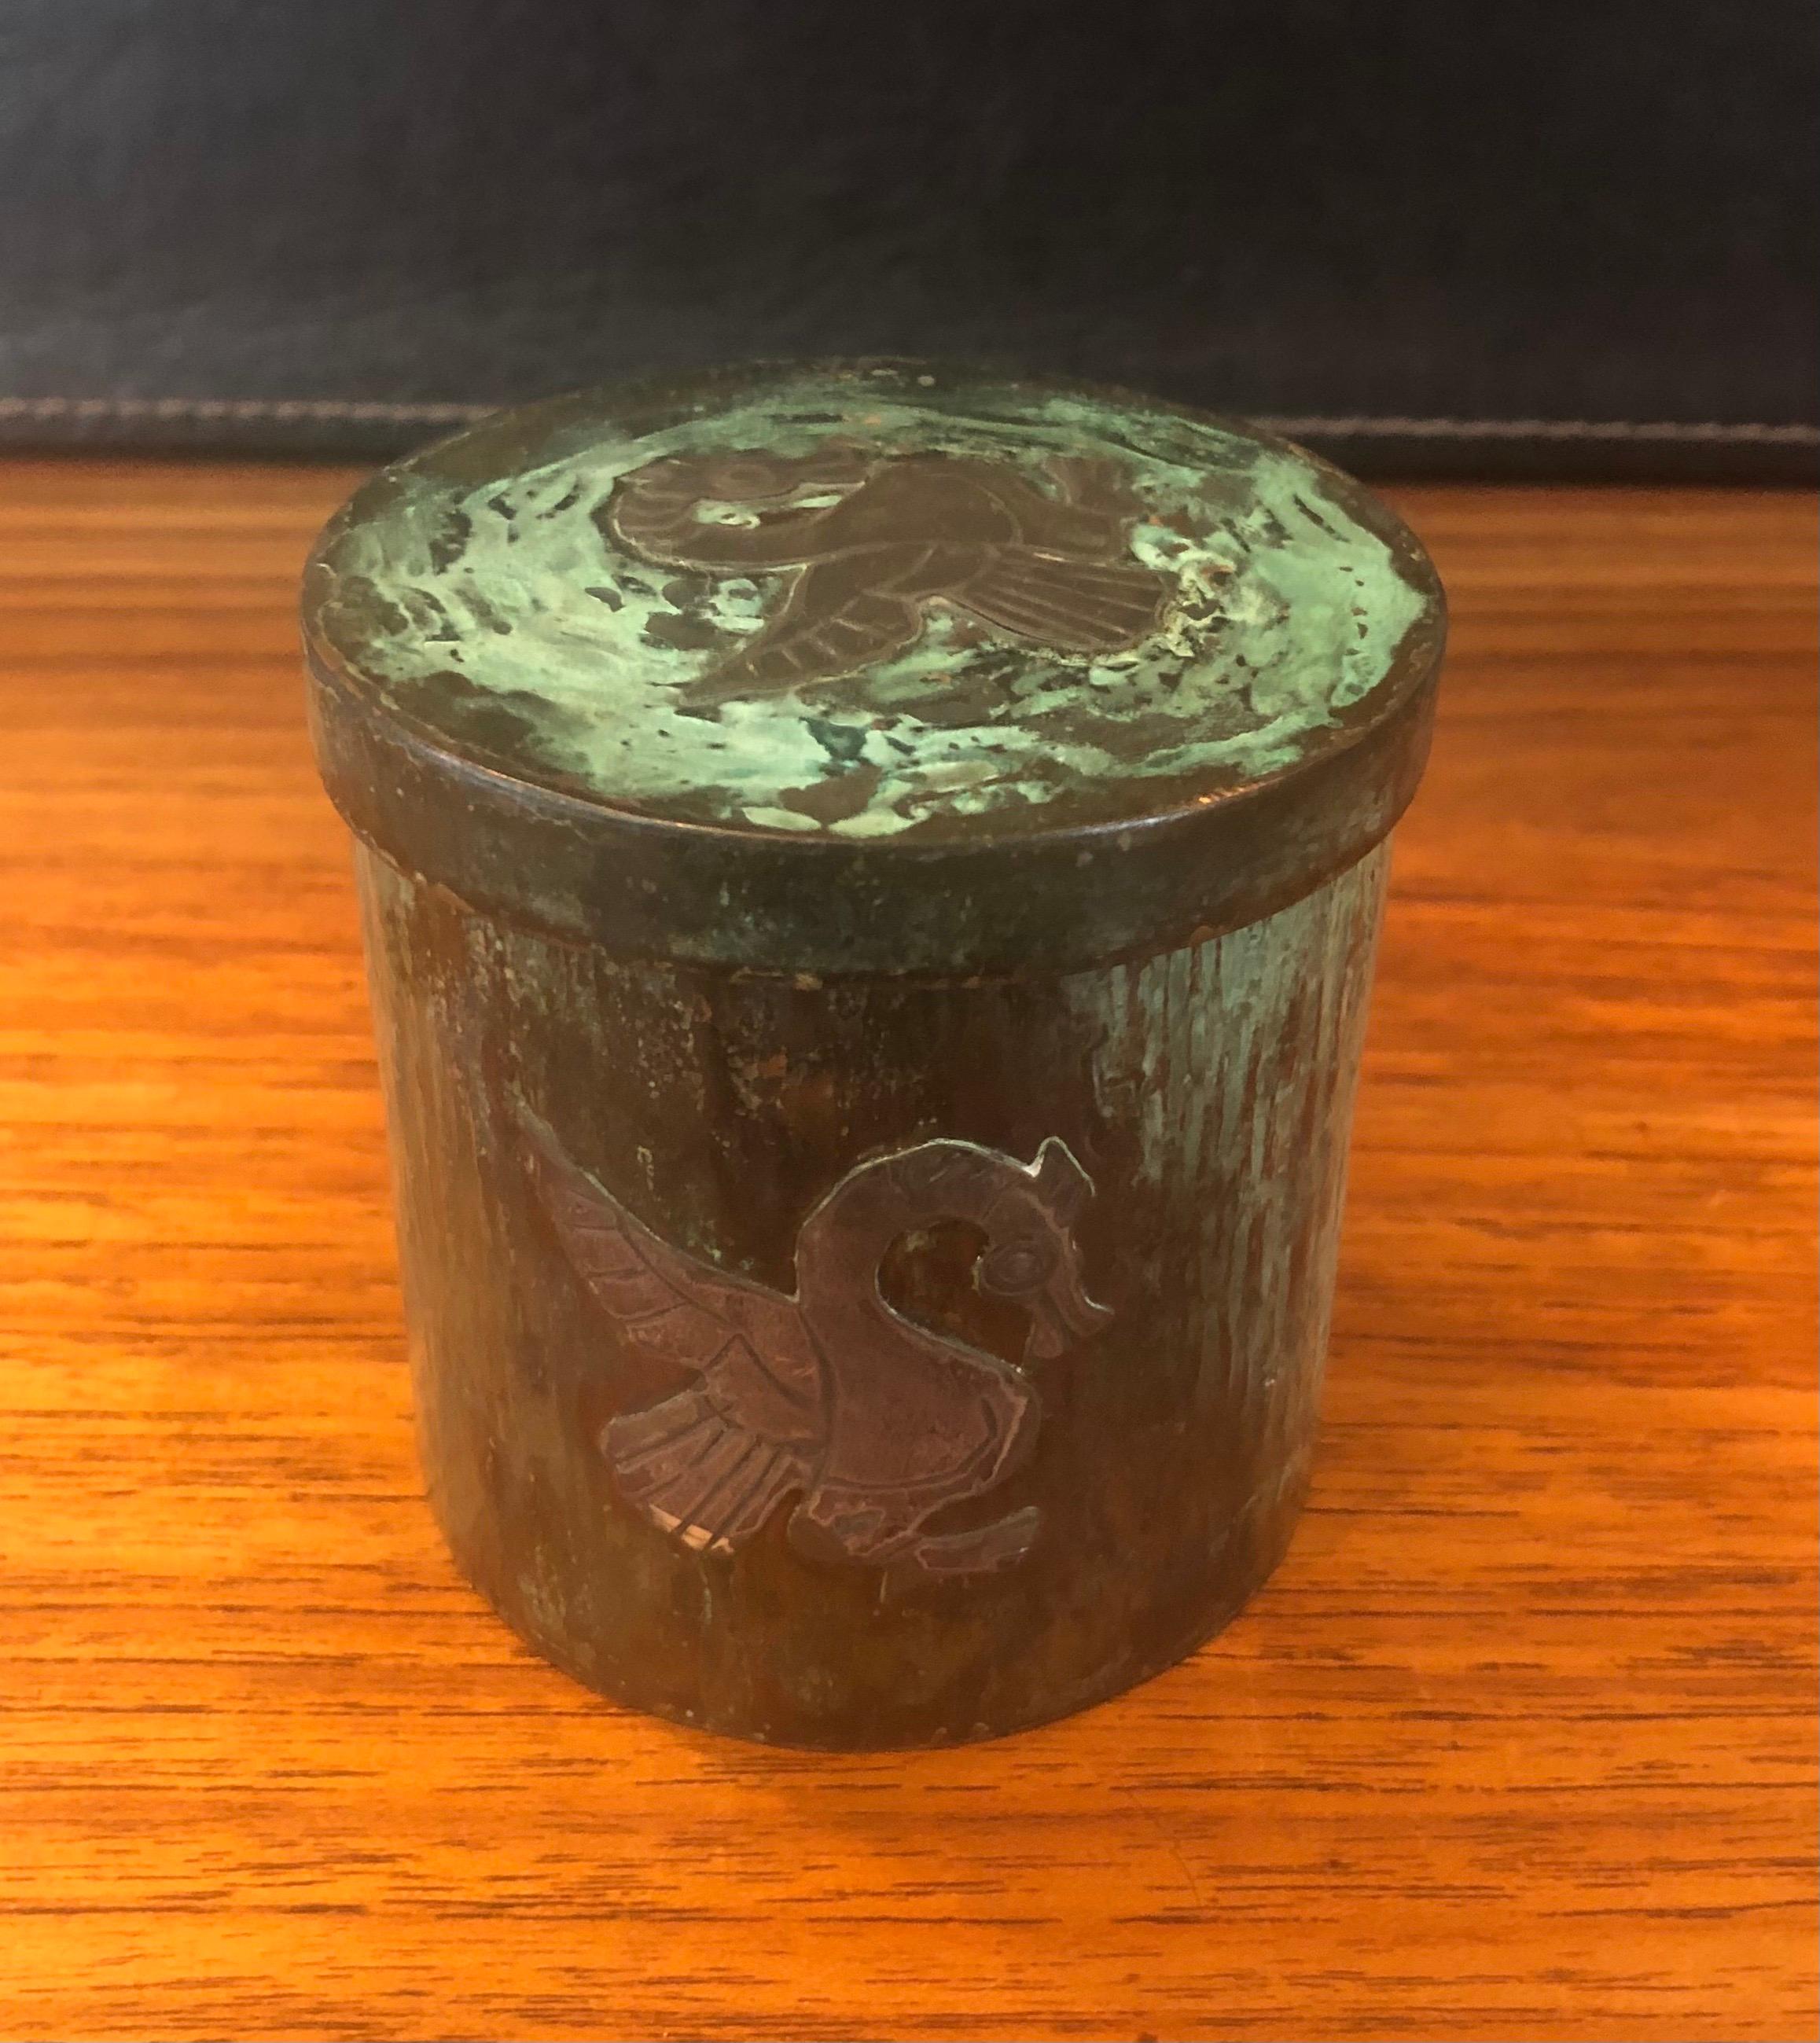 A very cool verdigris copper round trinket box with dragon design on front and top of lid. The box is in very good condition and measures 3.125